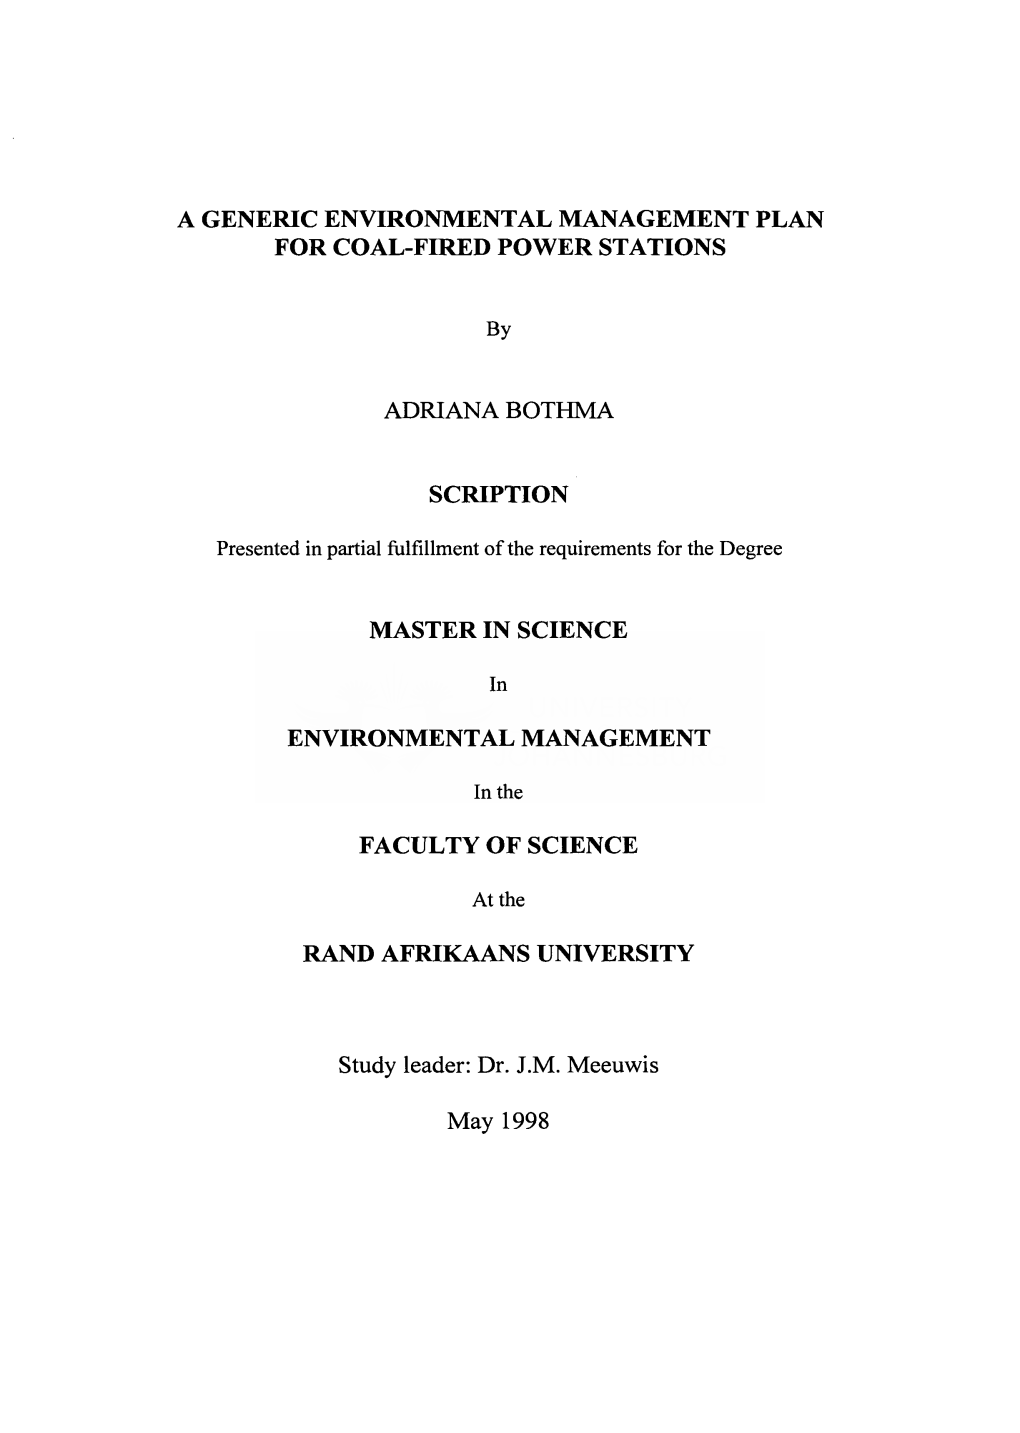 A Generic Environmental Management Plan for Coal-Fired Power Stations